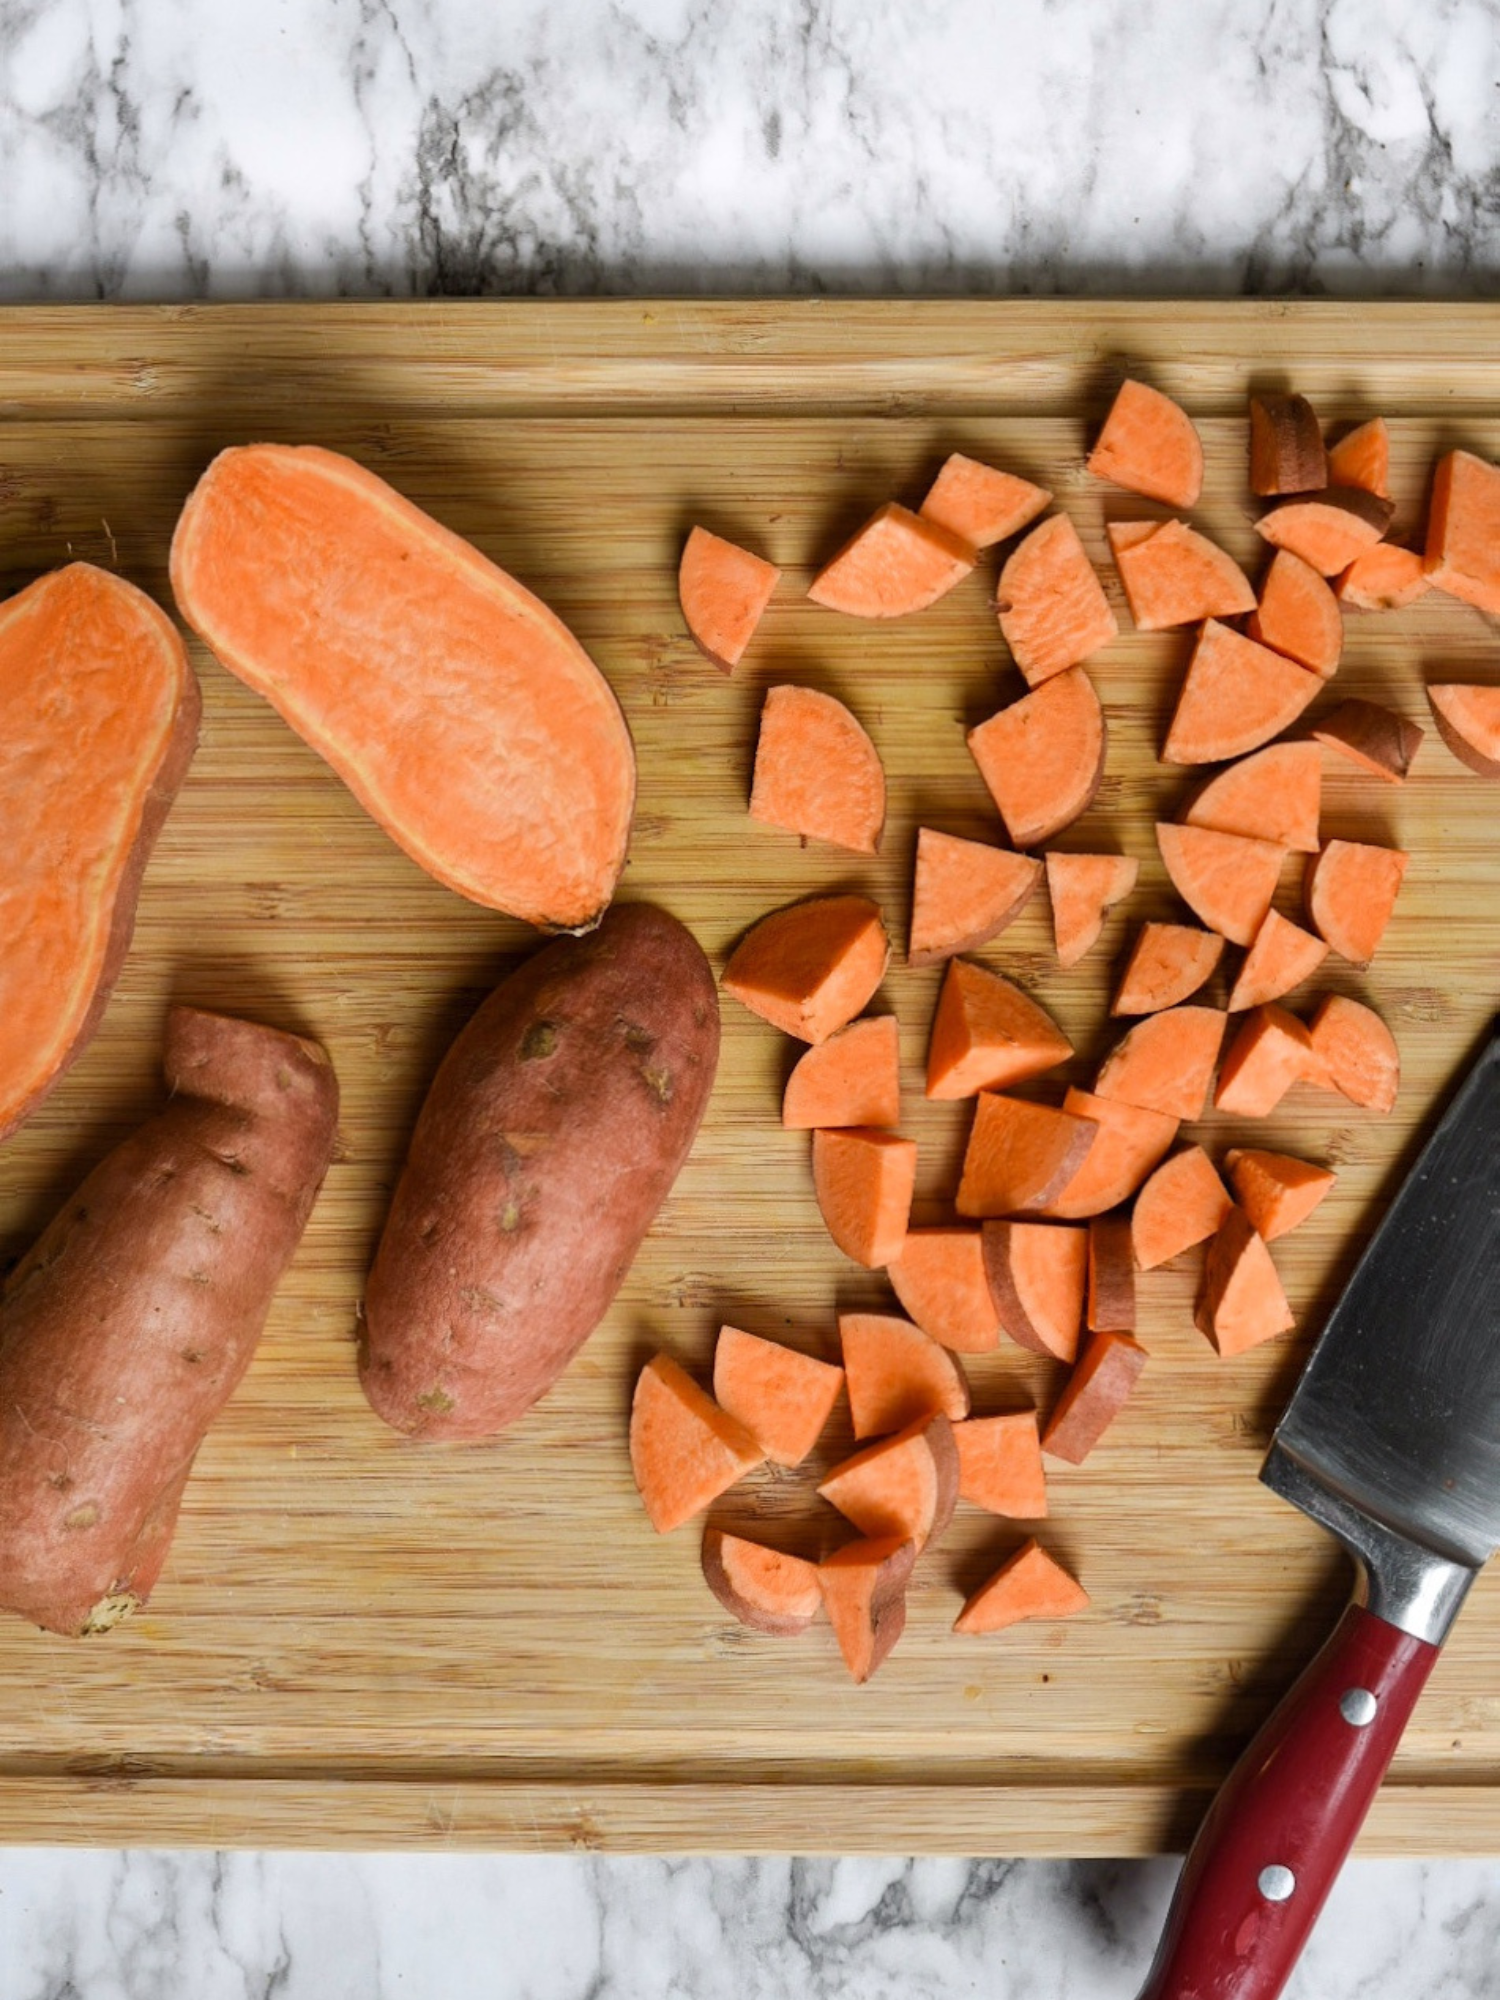 chopped sweet potatoes on a wooden cutting board with a knife